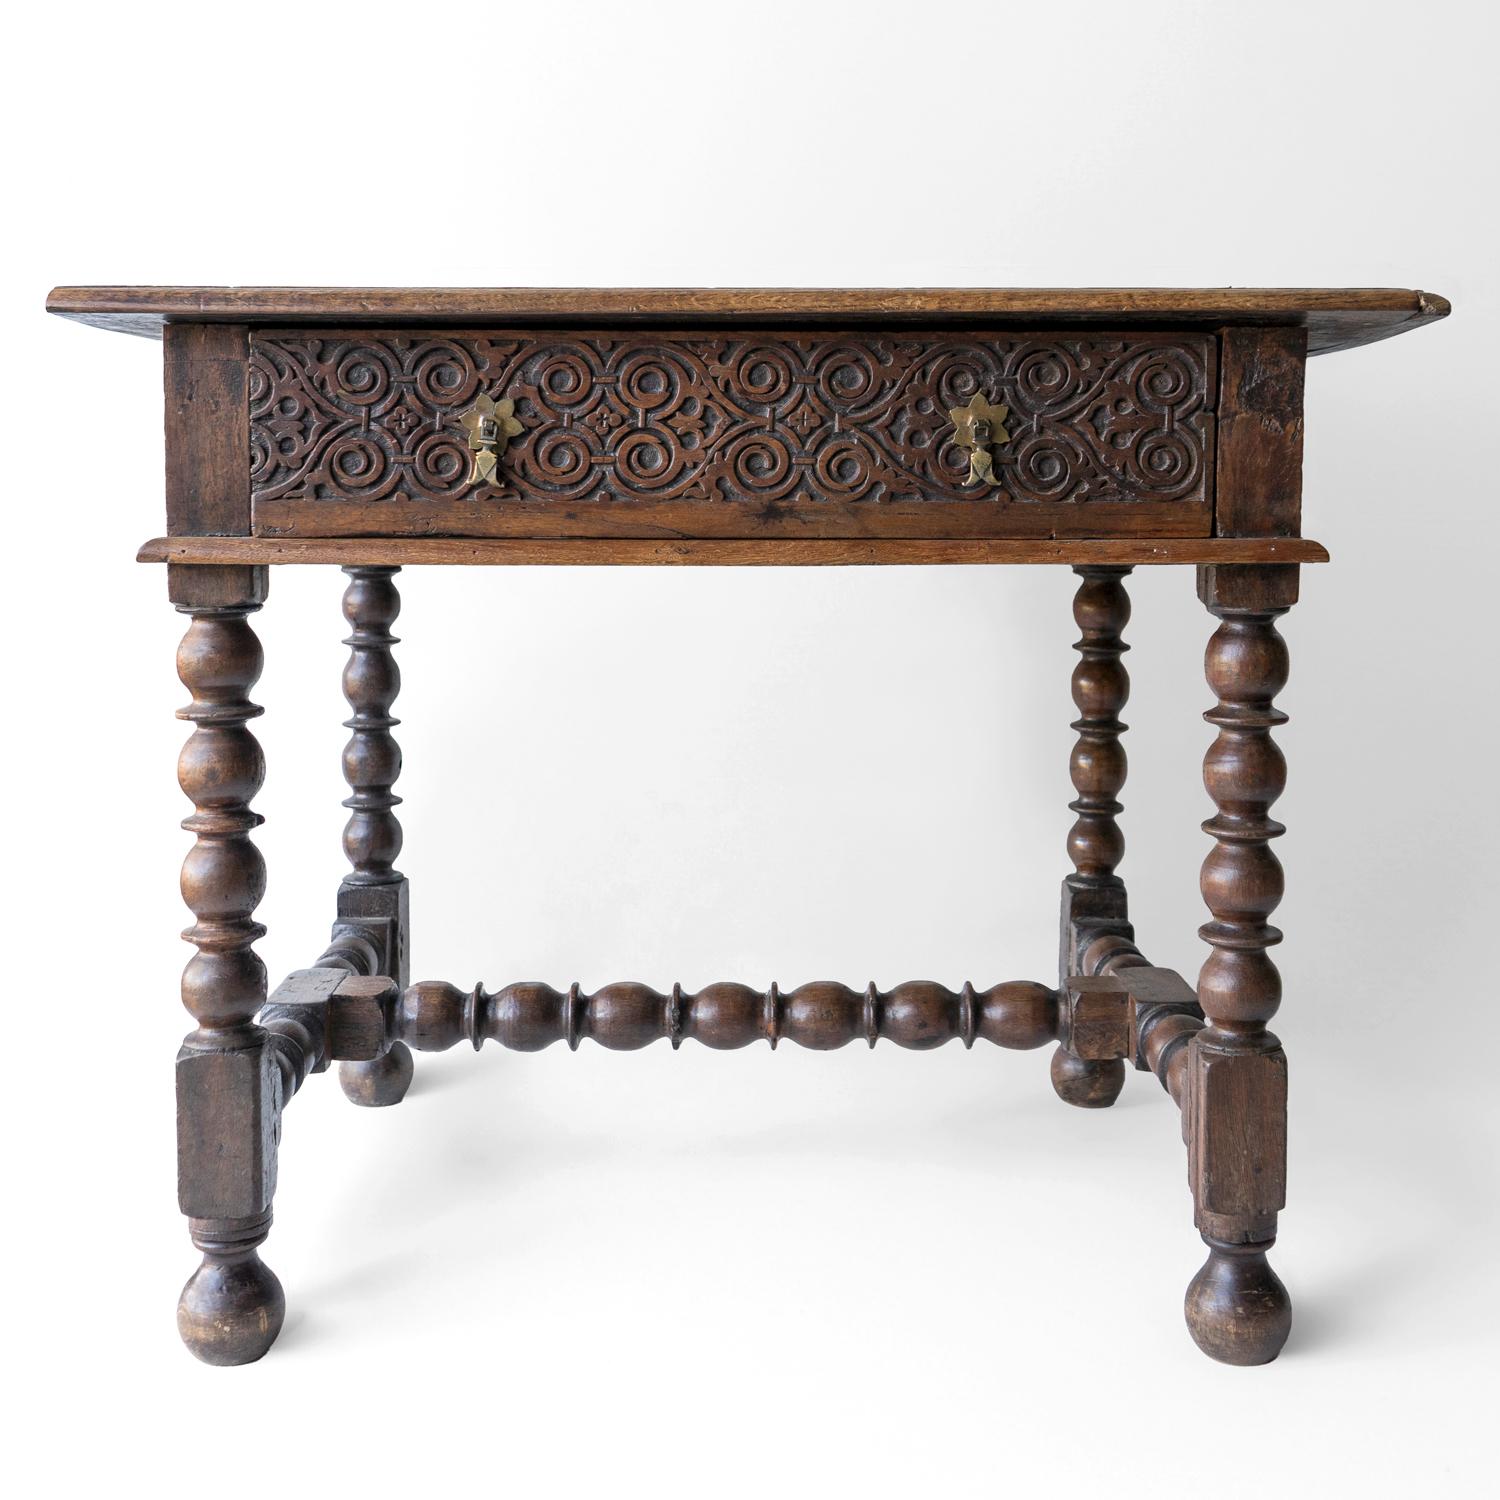 ANTIQUE RUSTIC COUNTRY MADE TABLE 
Peg joined and made from oak with a carved drawer and raised on bobbin-turned supports and stretchers. The panel on the right-hand side is also carved.

Probably dating from the mid-18th century circa 1750, made